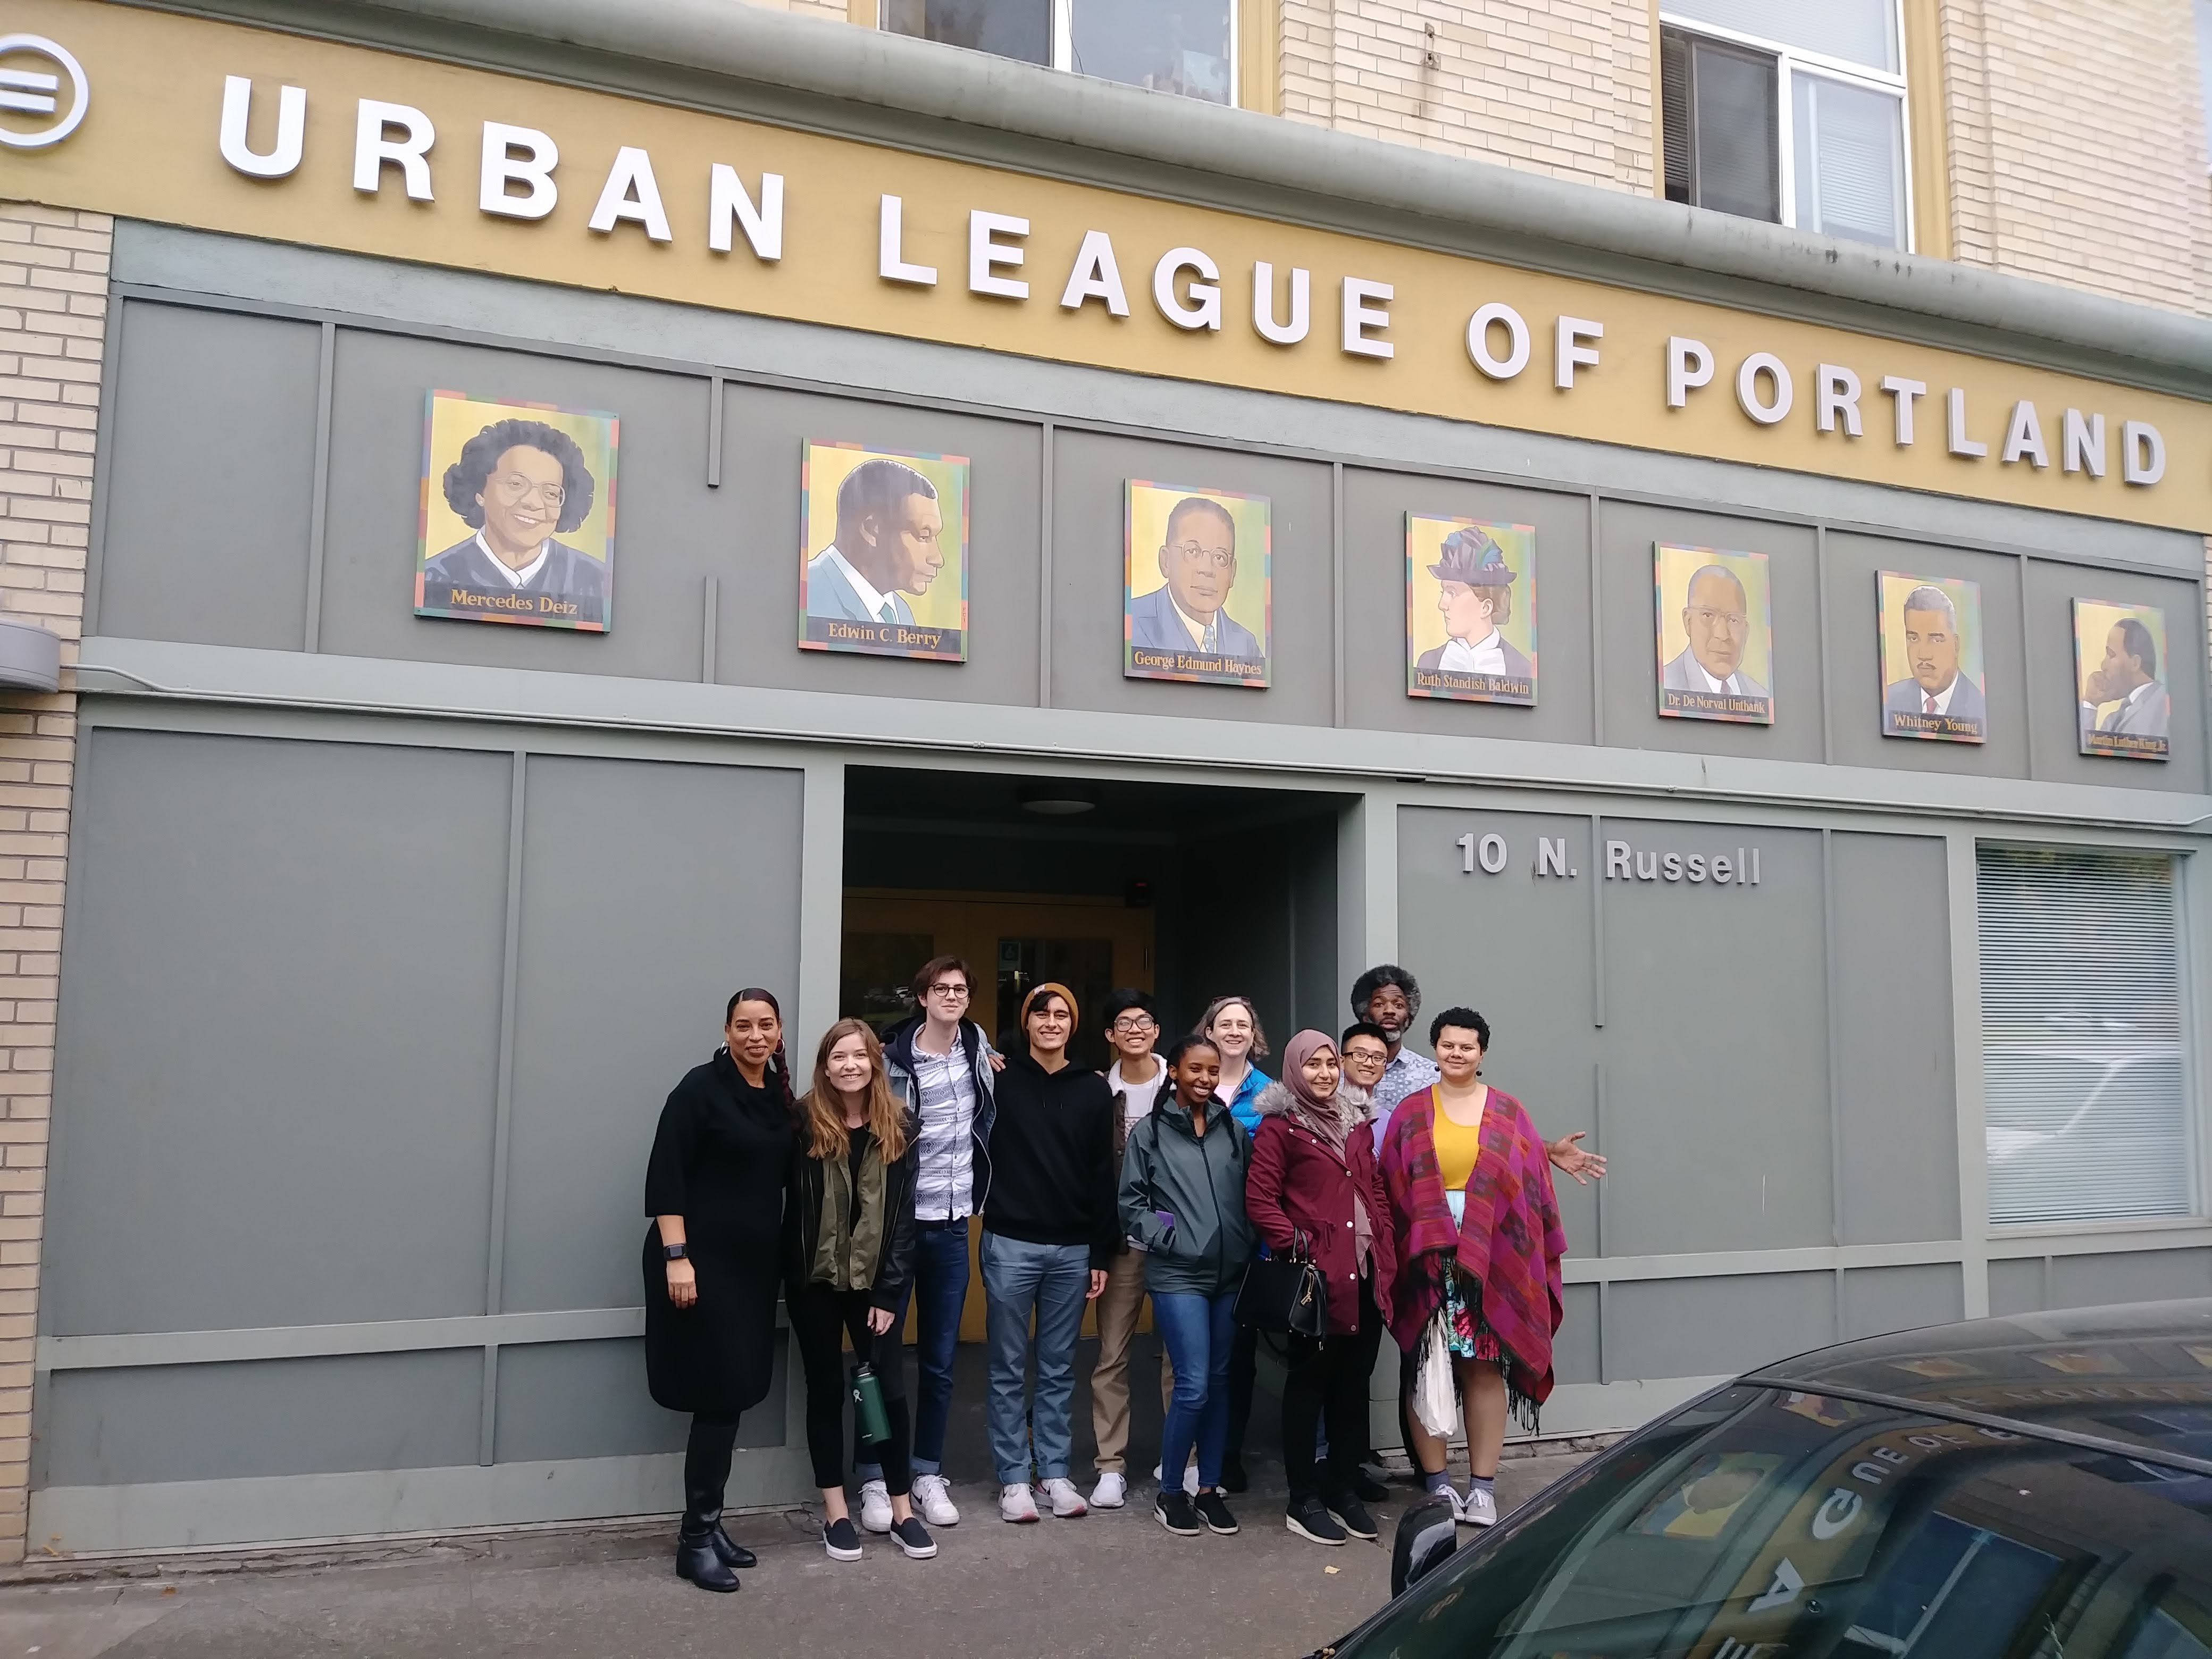 North Portland immersion participants in front of the Urban League building.